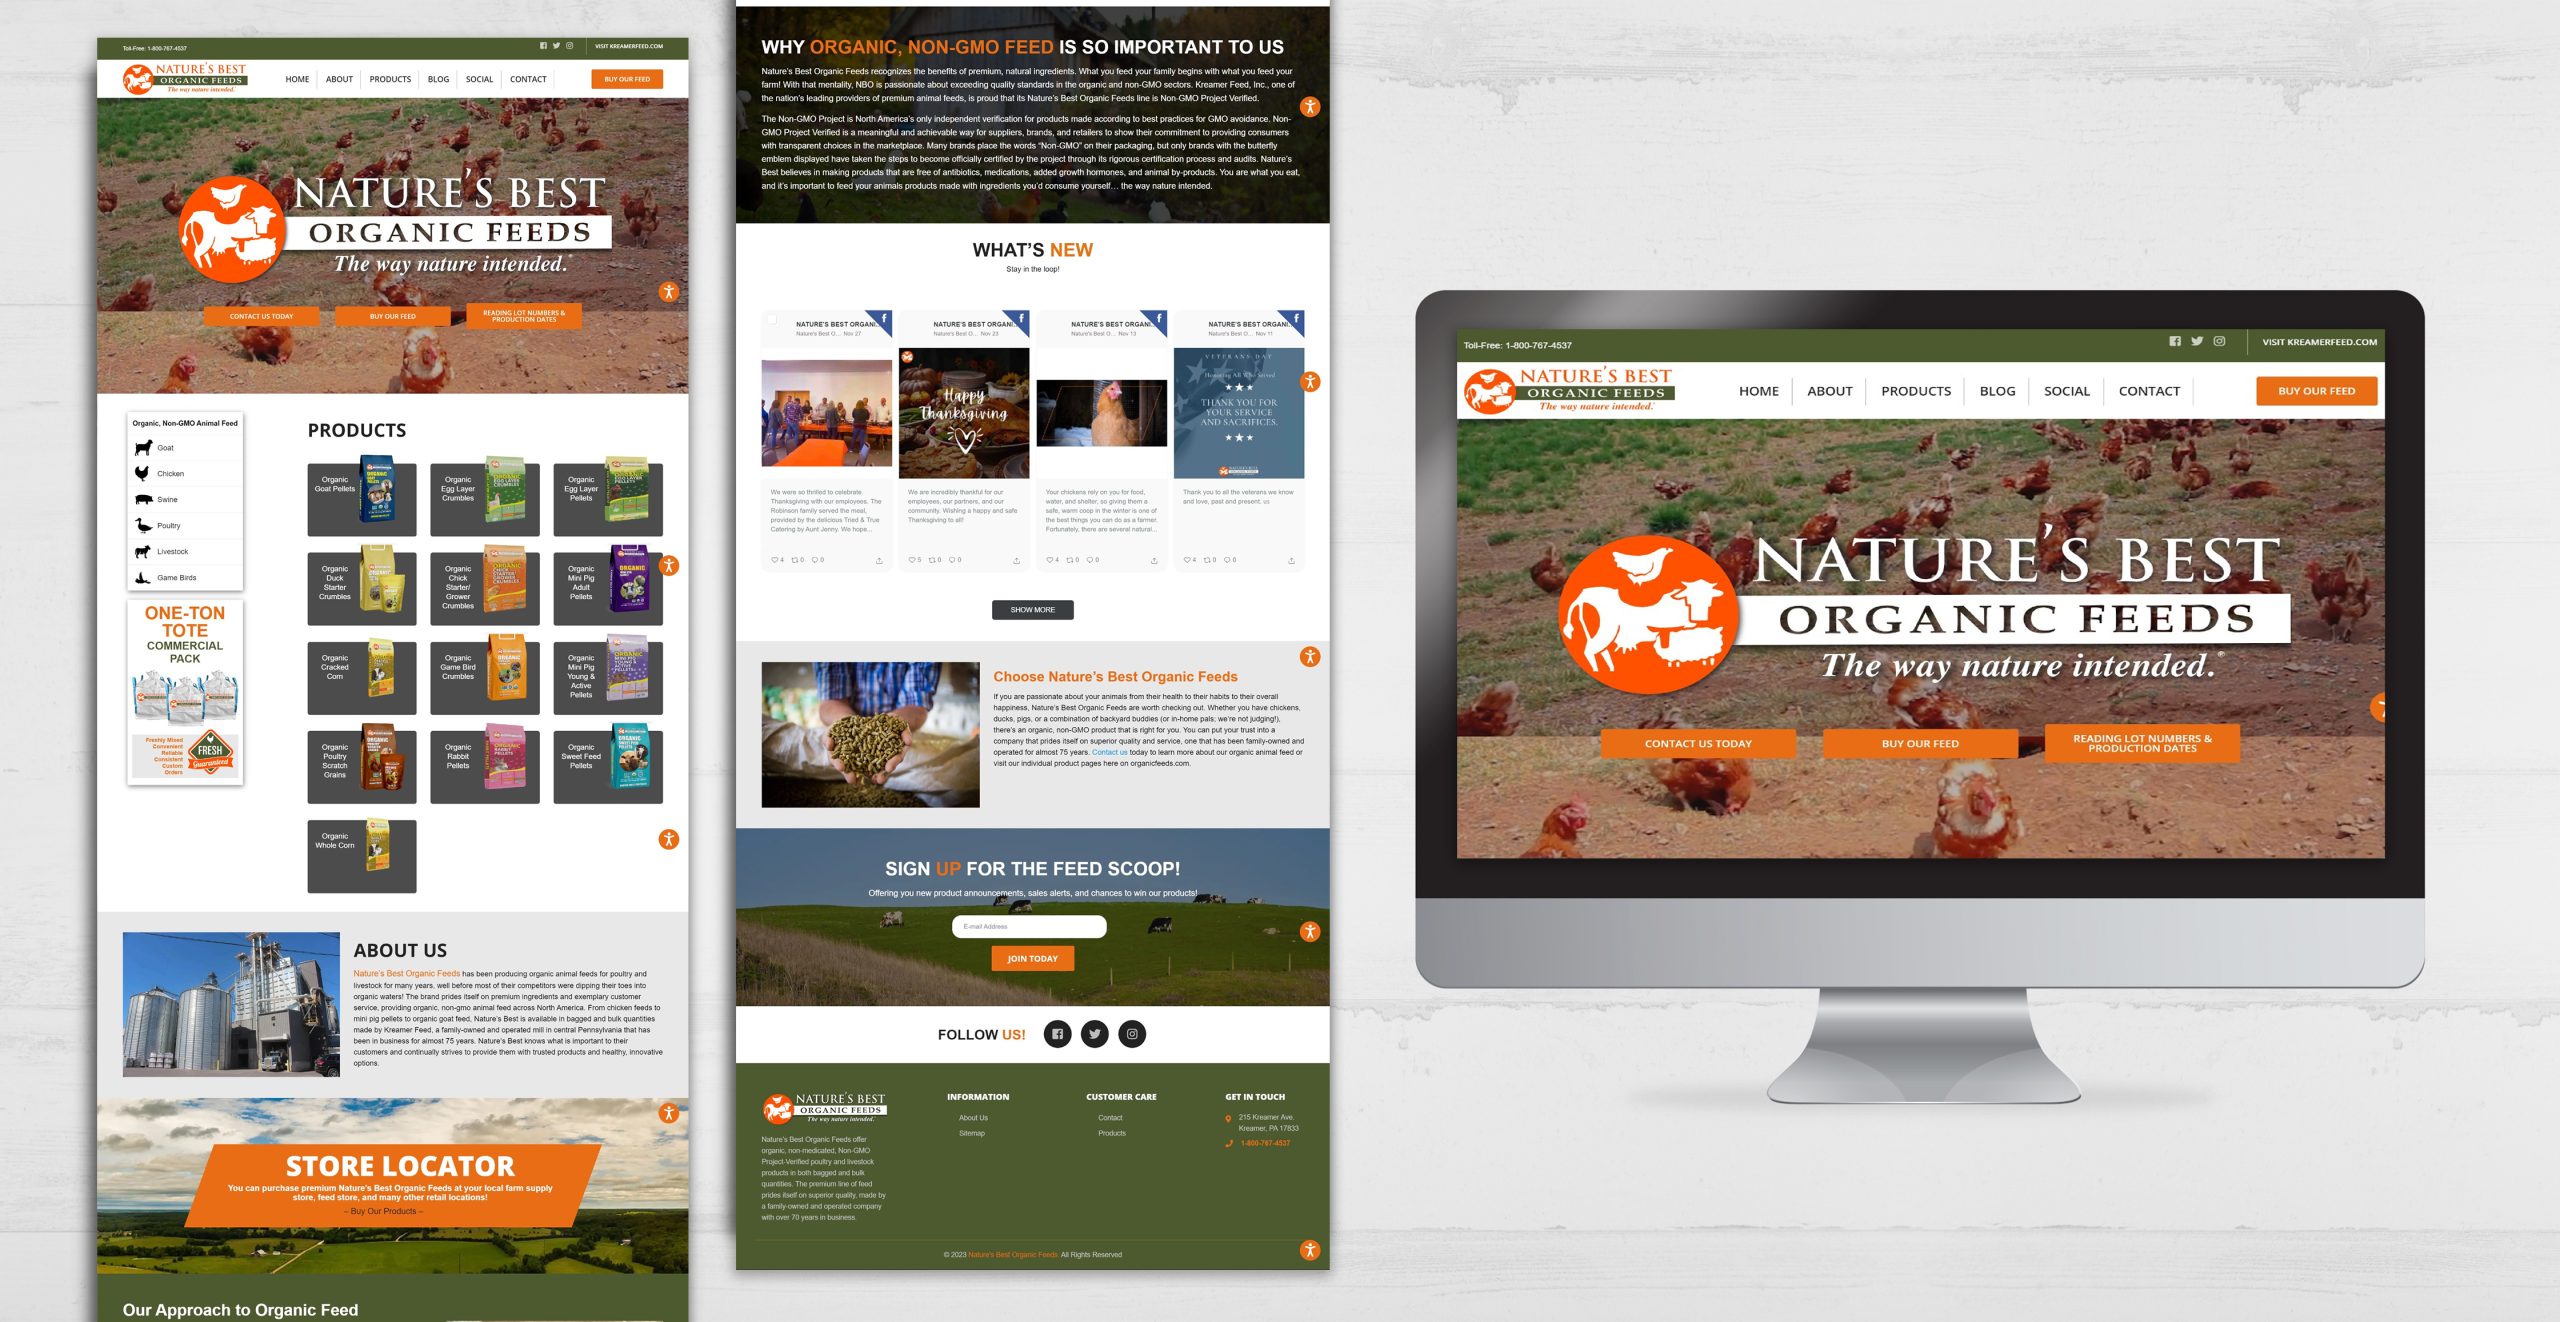 Nature's Best Organic Feeds Webpage